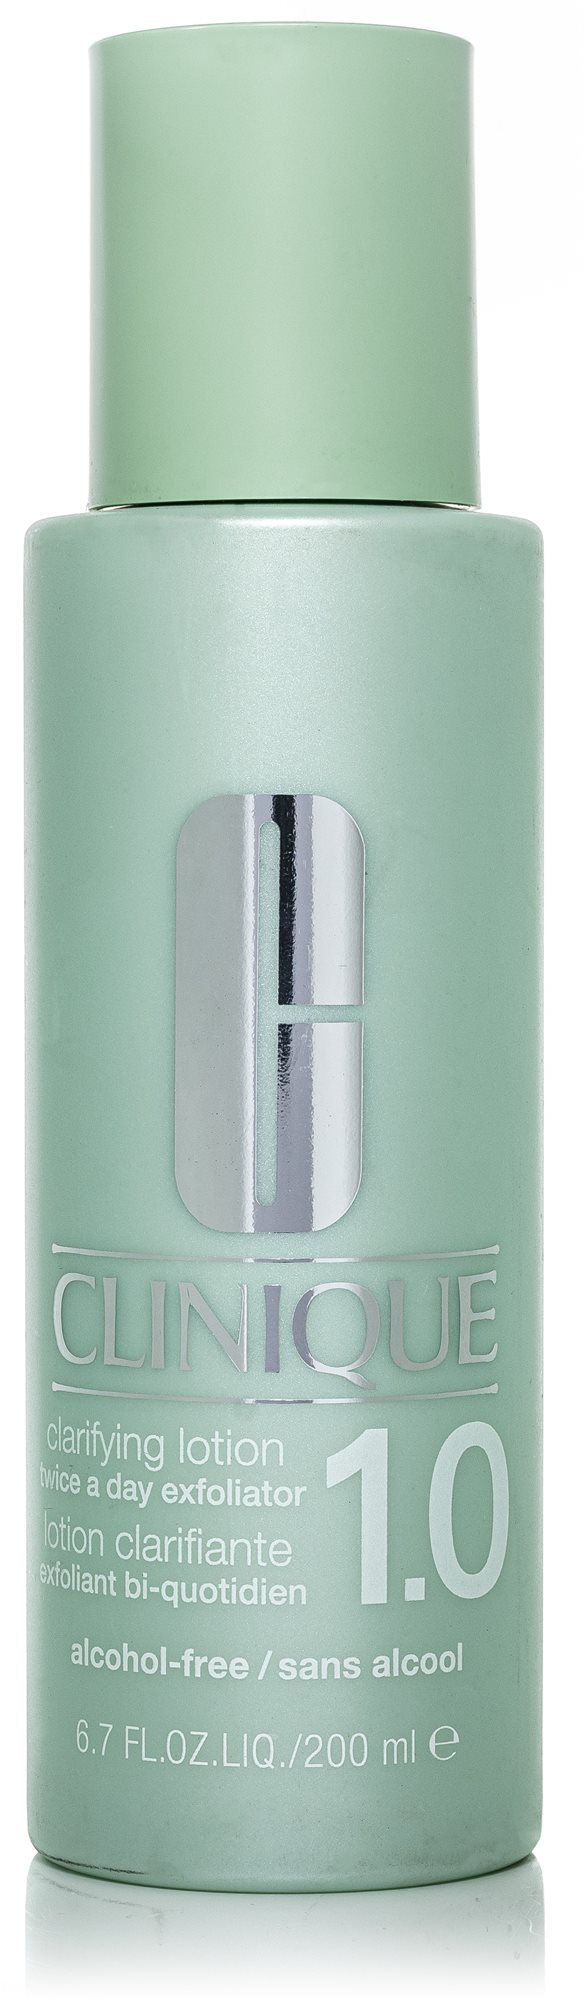 CLINIQUE Clarifying Lotion 1.0 Twice A Day Exfoliator 200 ml